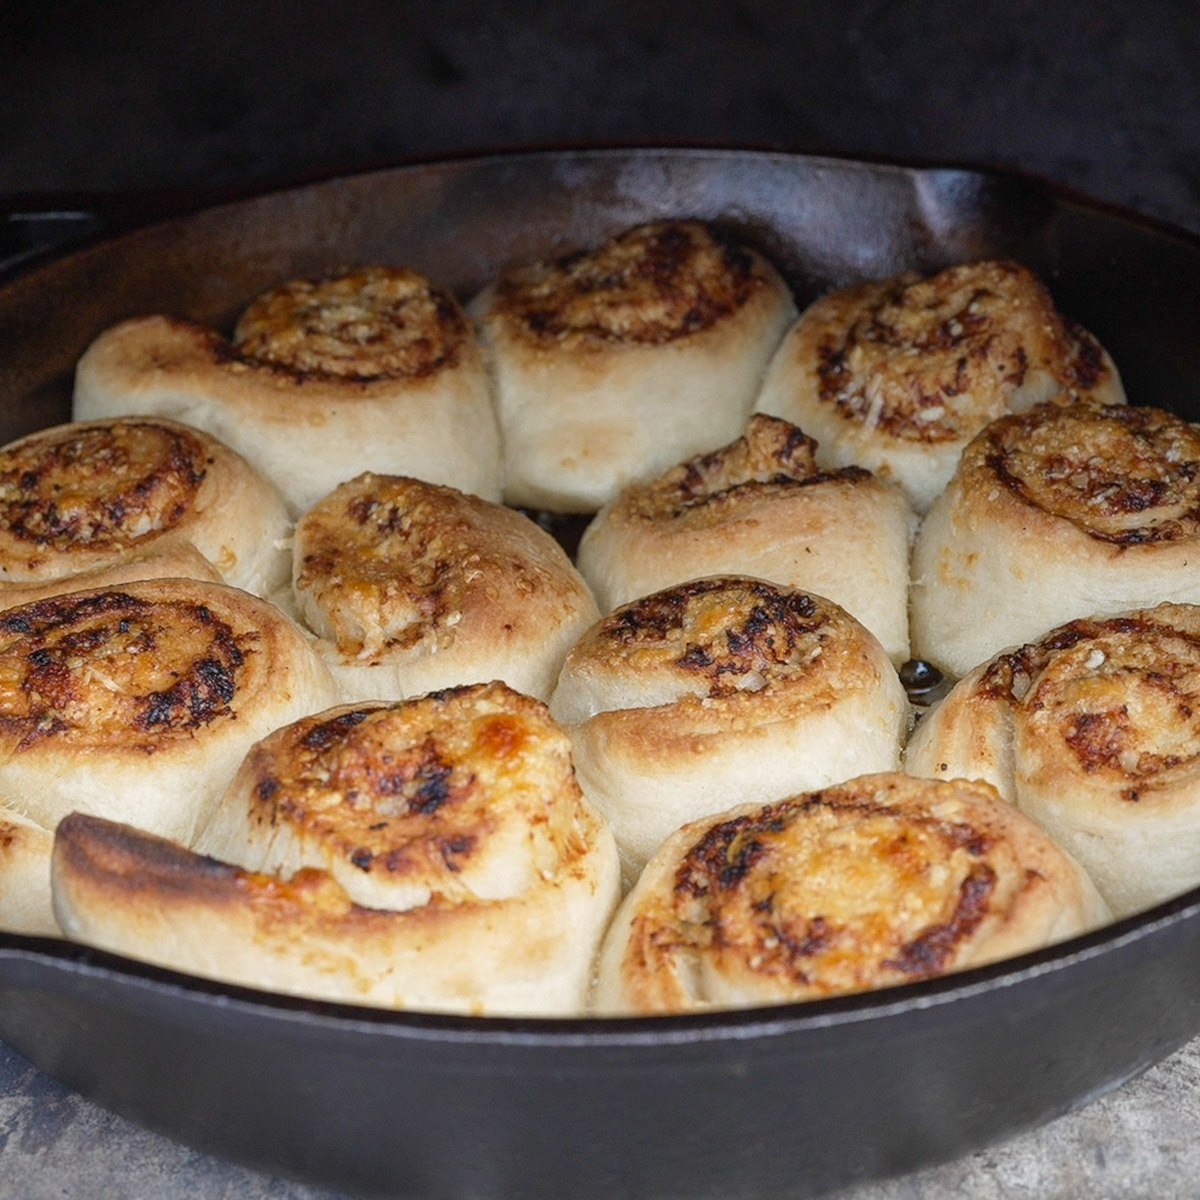 Cheesy garlic rolls coming out of a wood-fired oven.